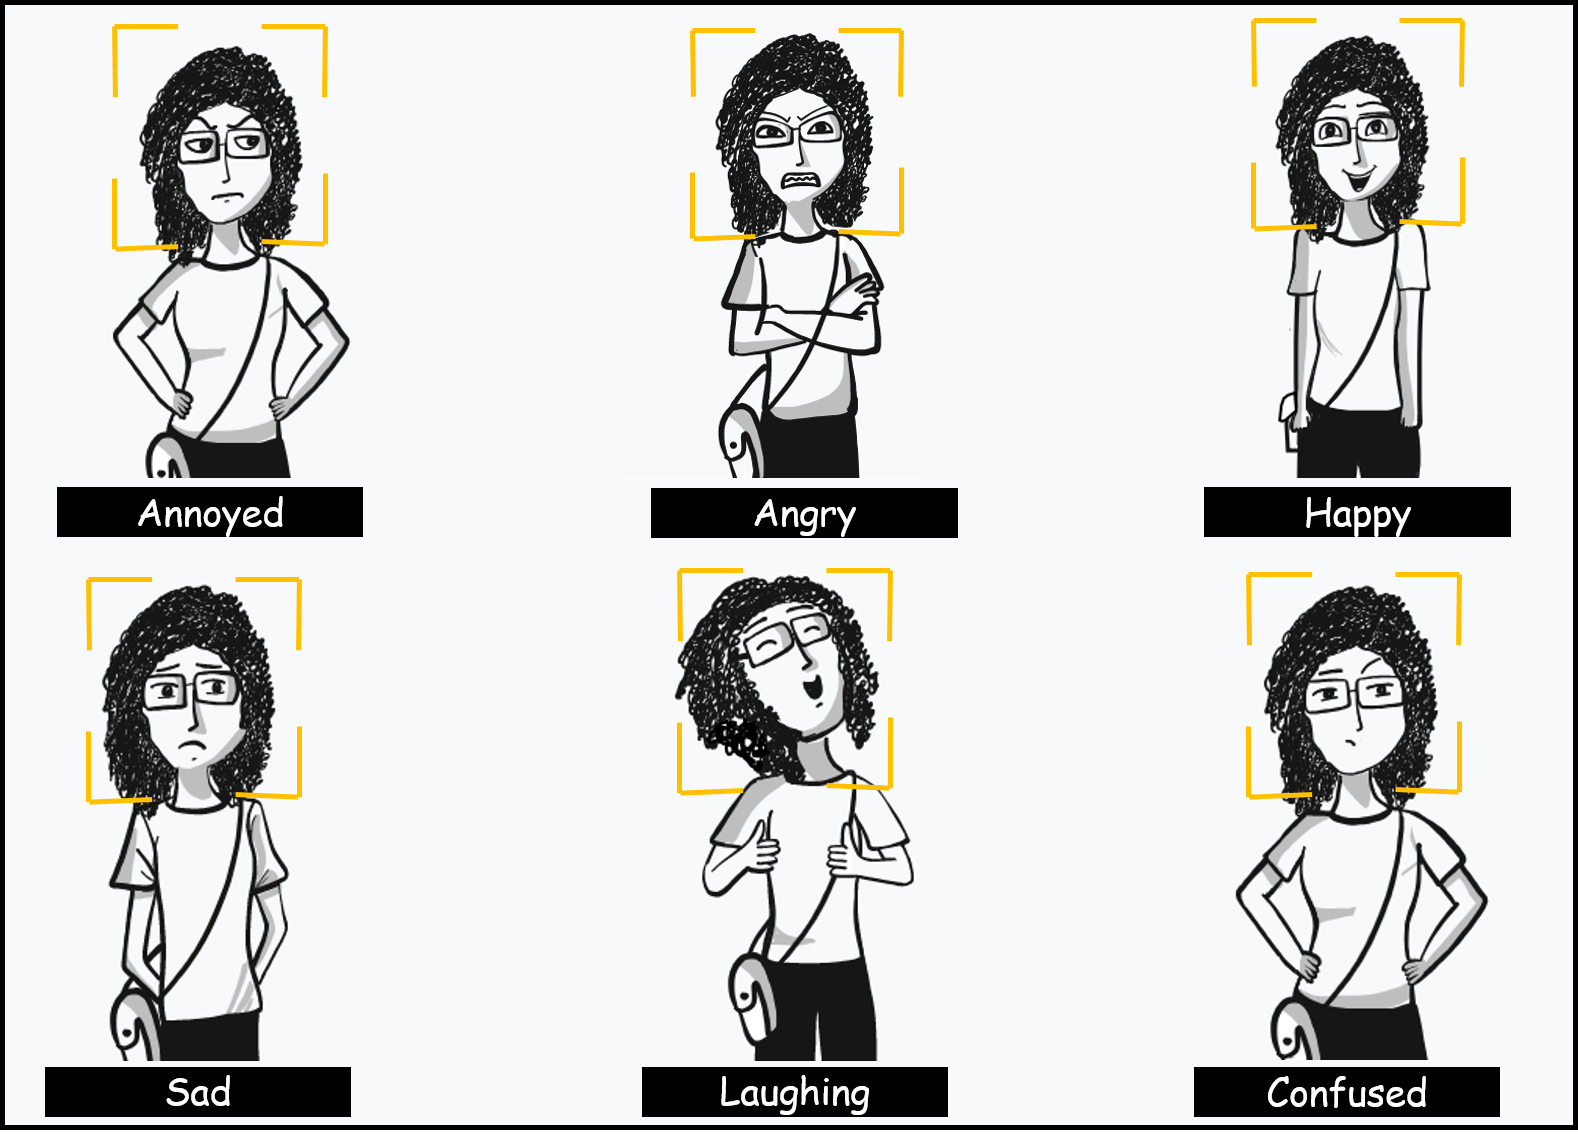 Comic to show various emotion of humans being detected by emotion analytics software.